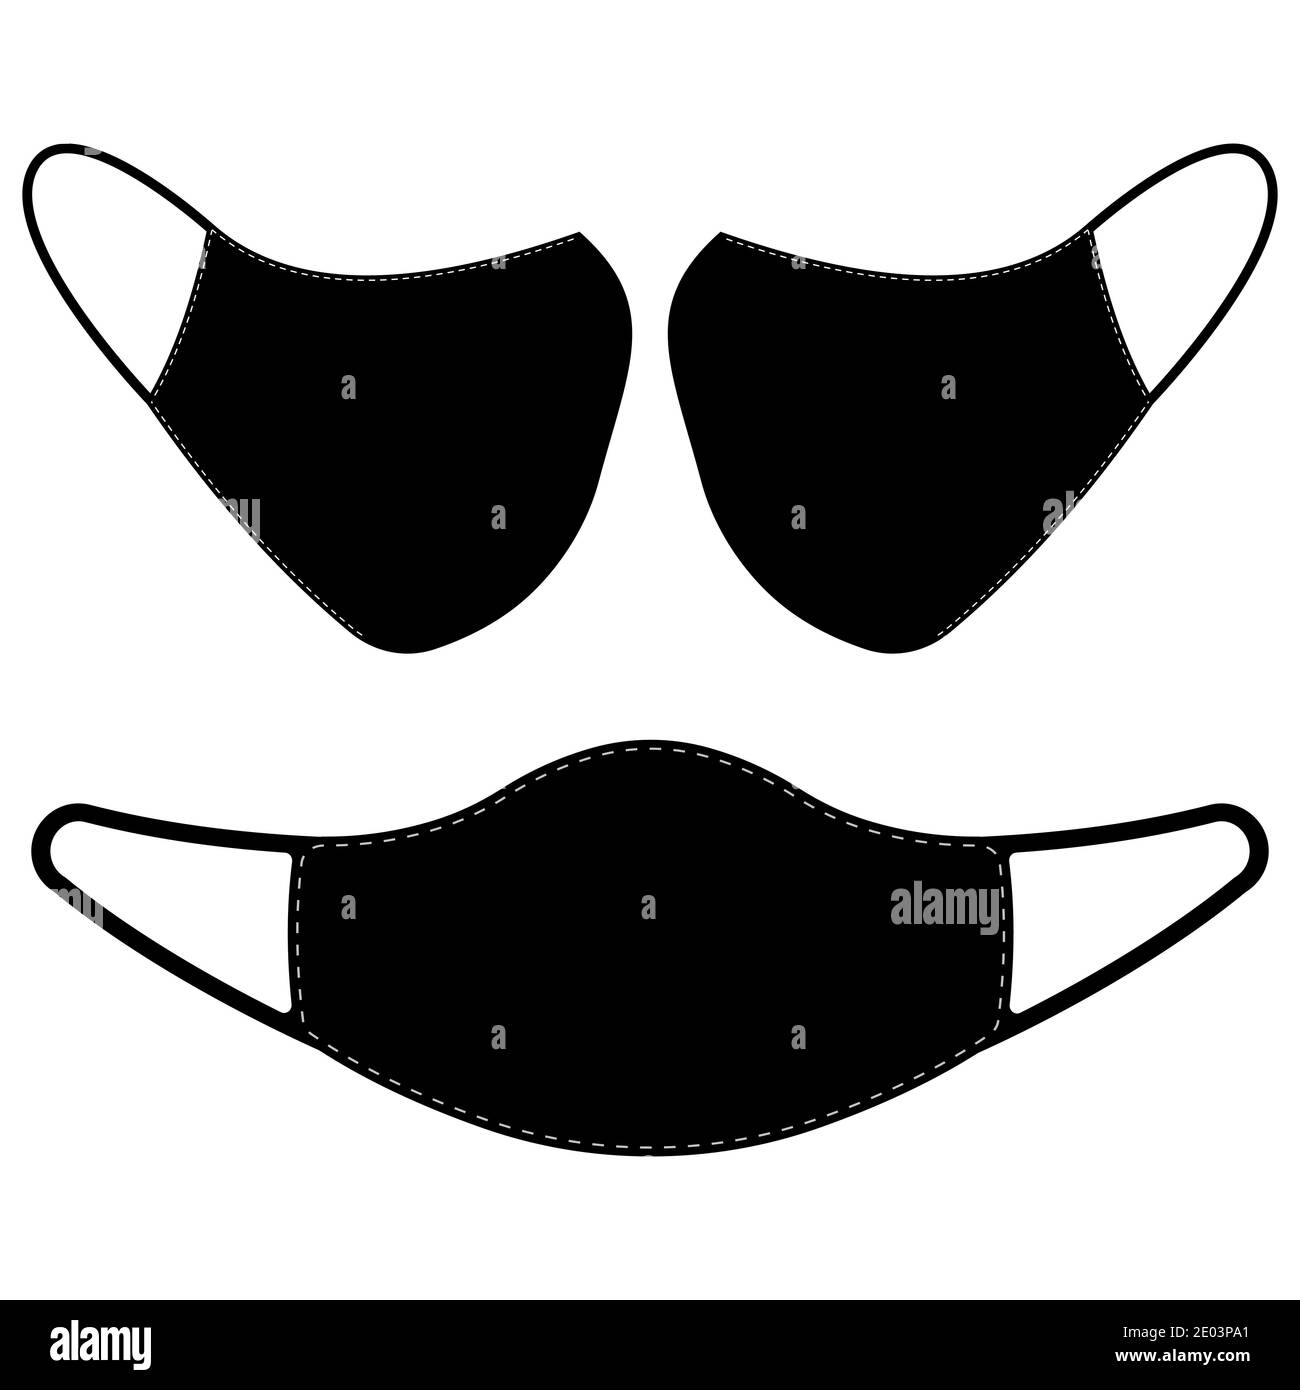 medical mask protection of the respiratory tract from the coronavirus virus, vector black medical mask view from side and from the front Stock Vector